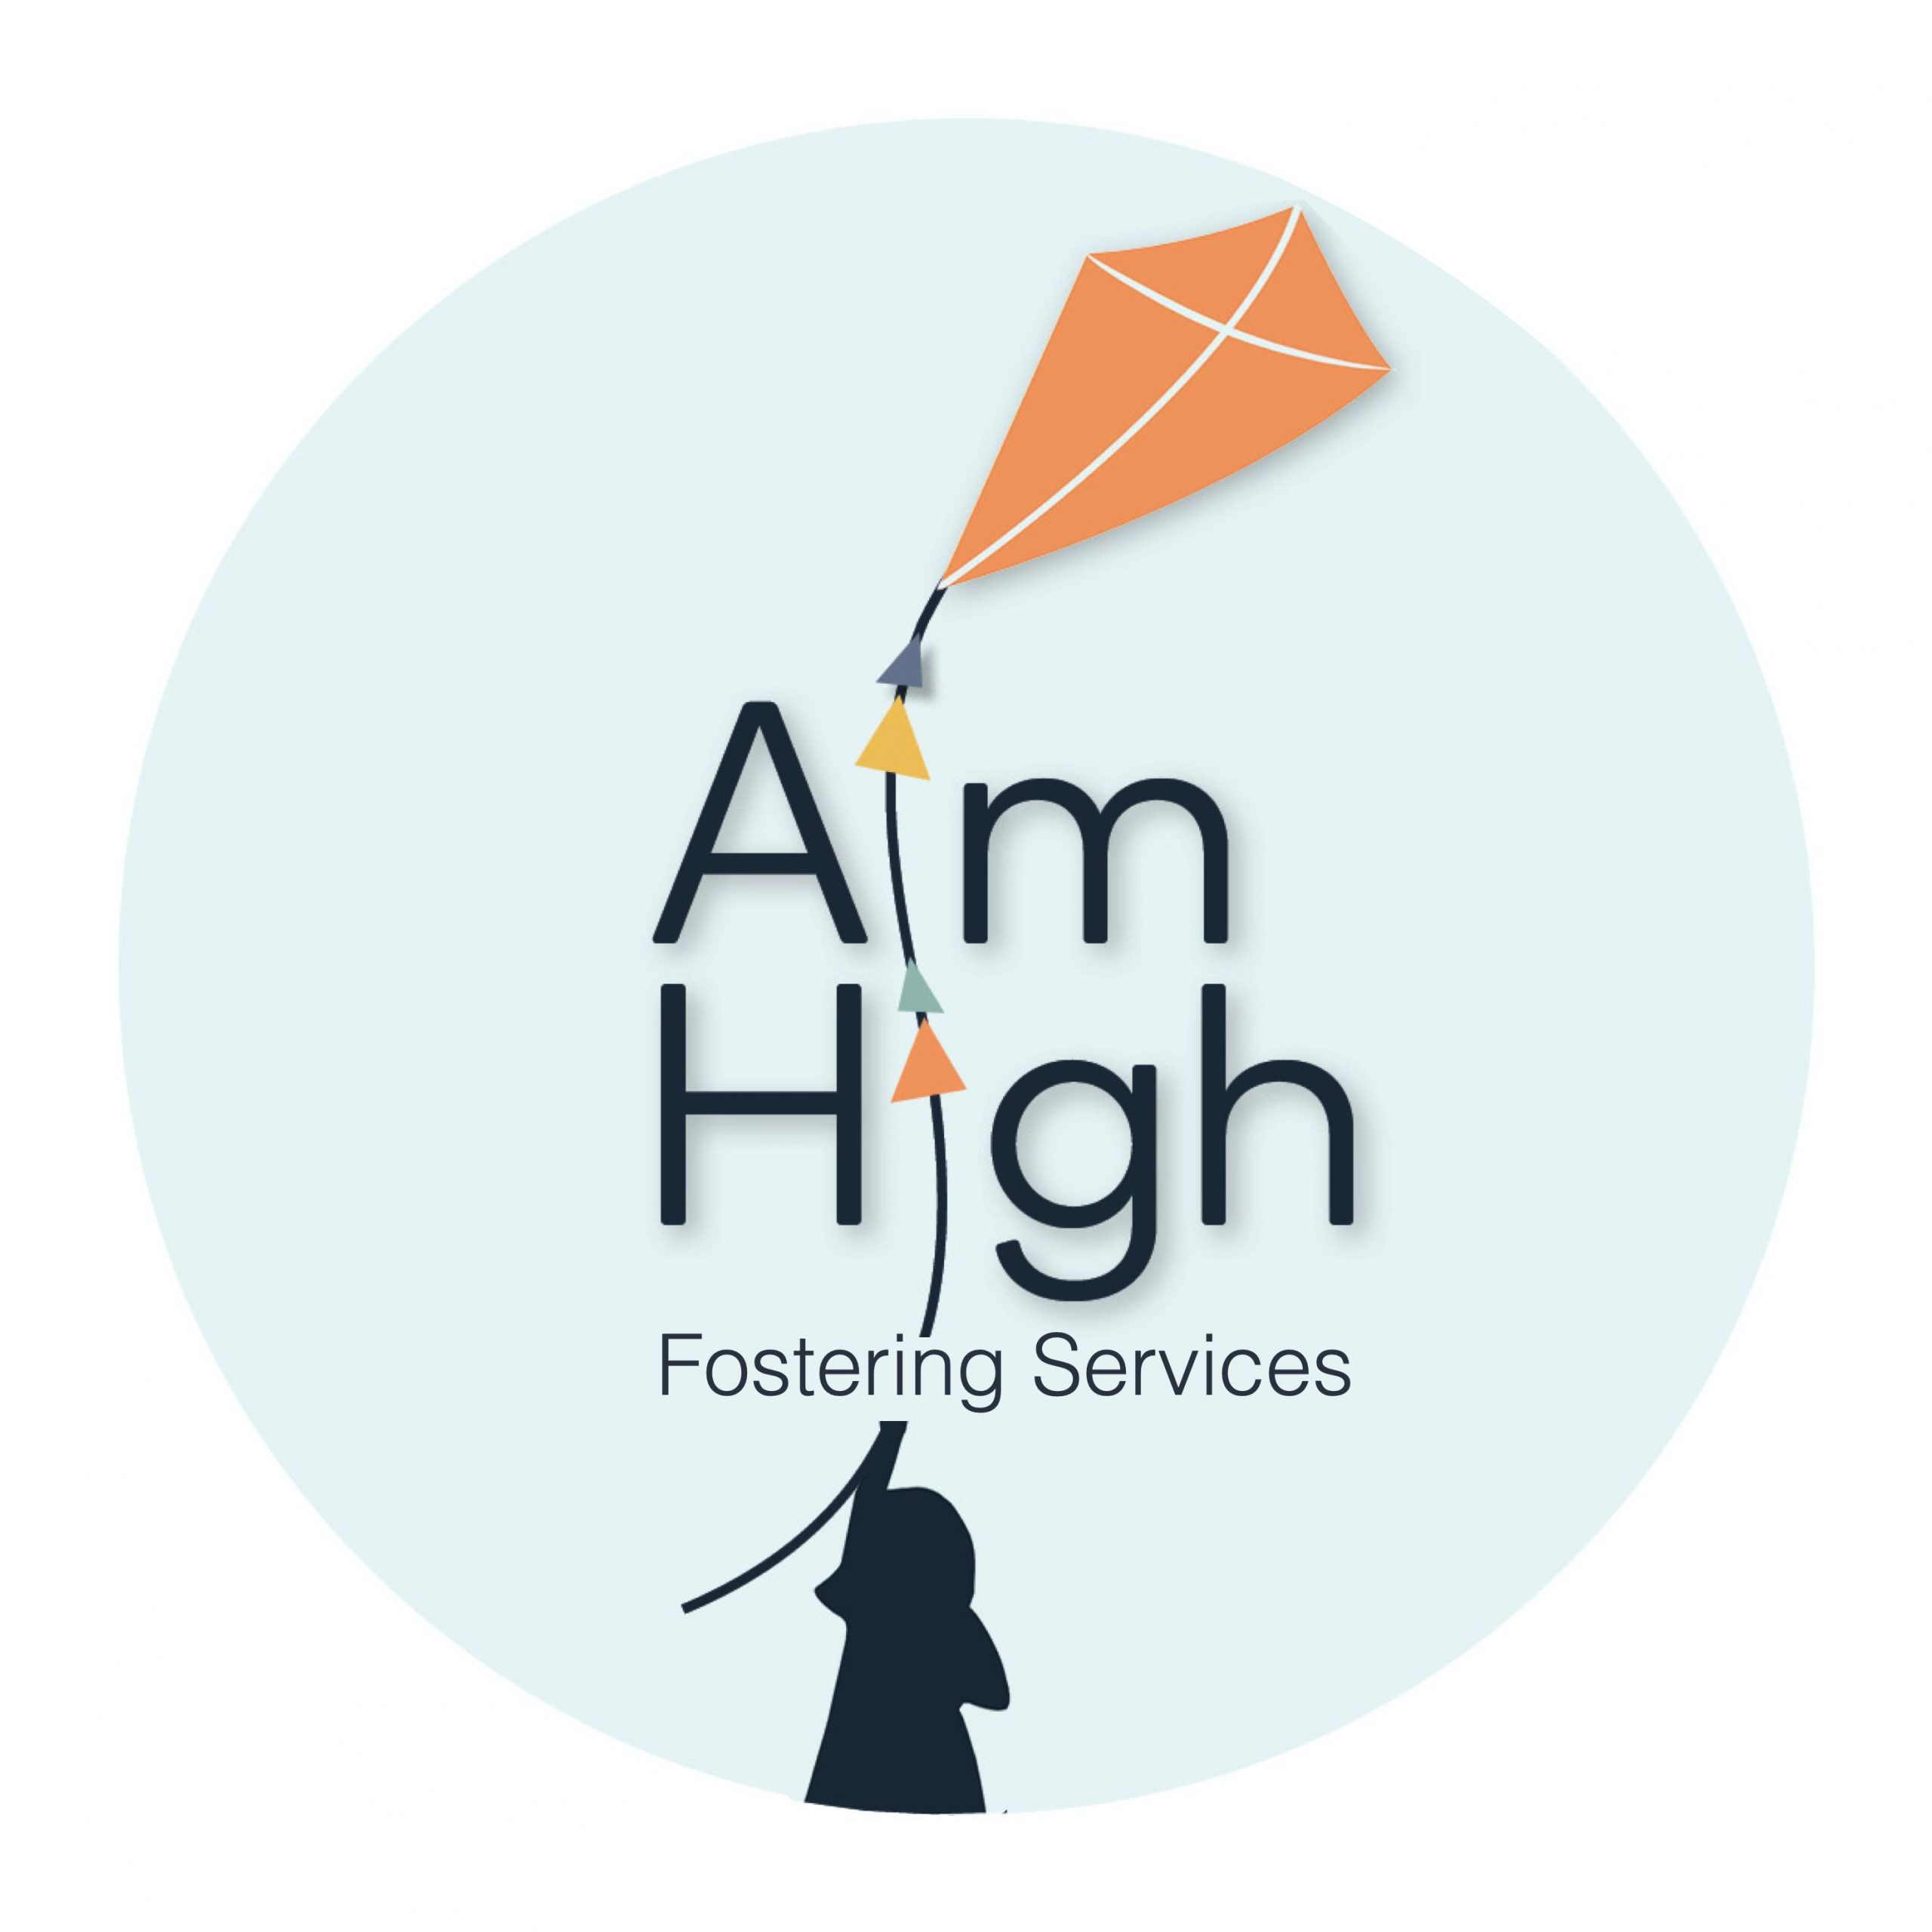 Aim High Fostering Services